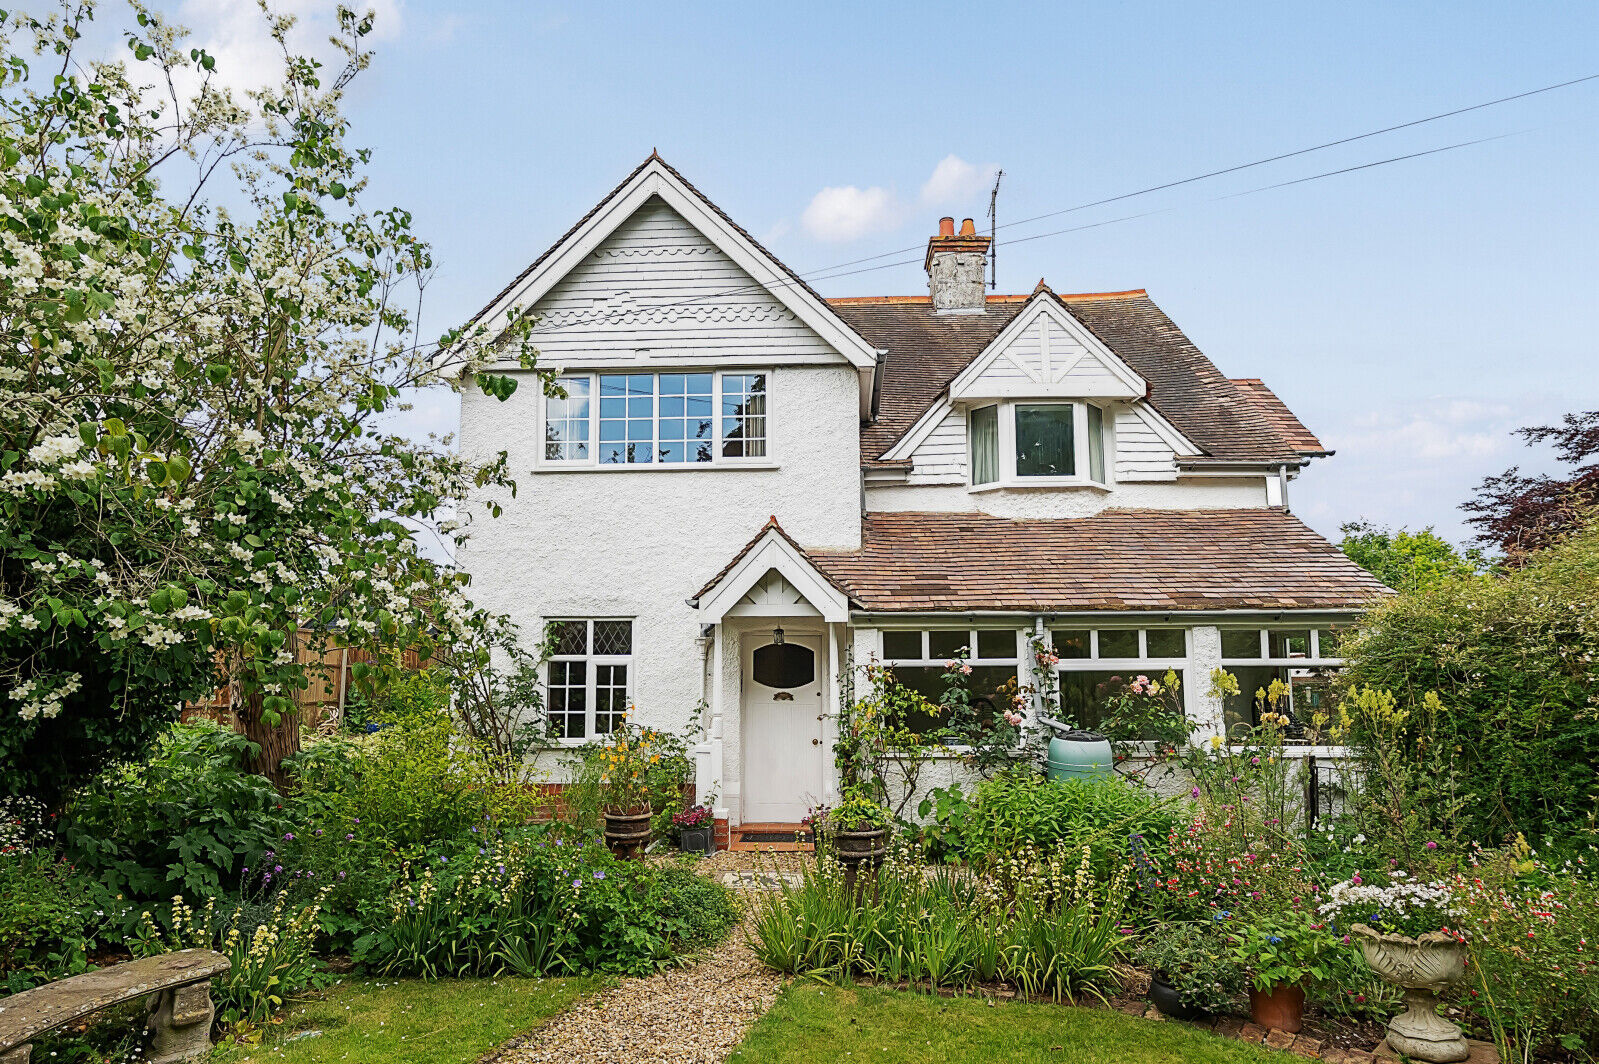 5 bedroom detached house for sale Townsend Road, Streatley, RG8, main image